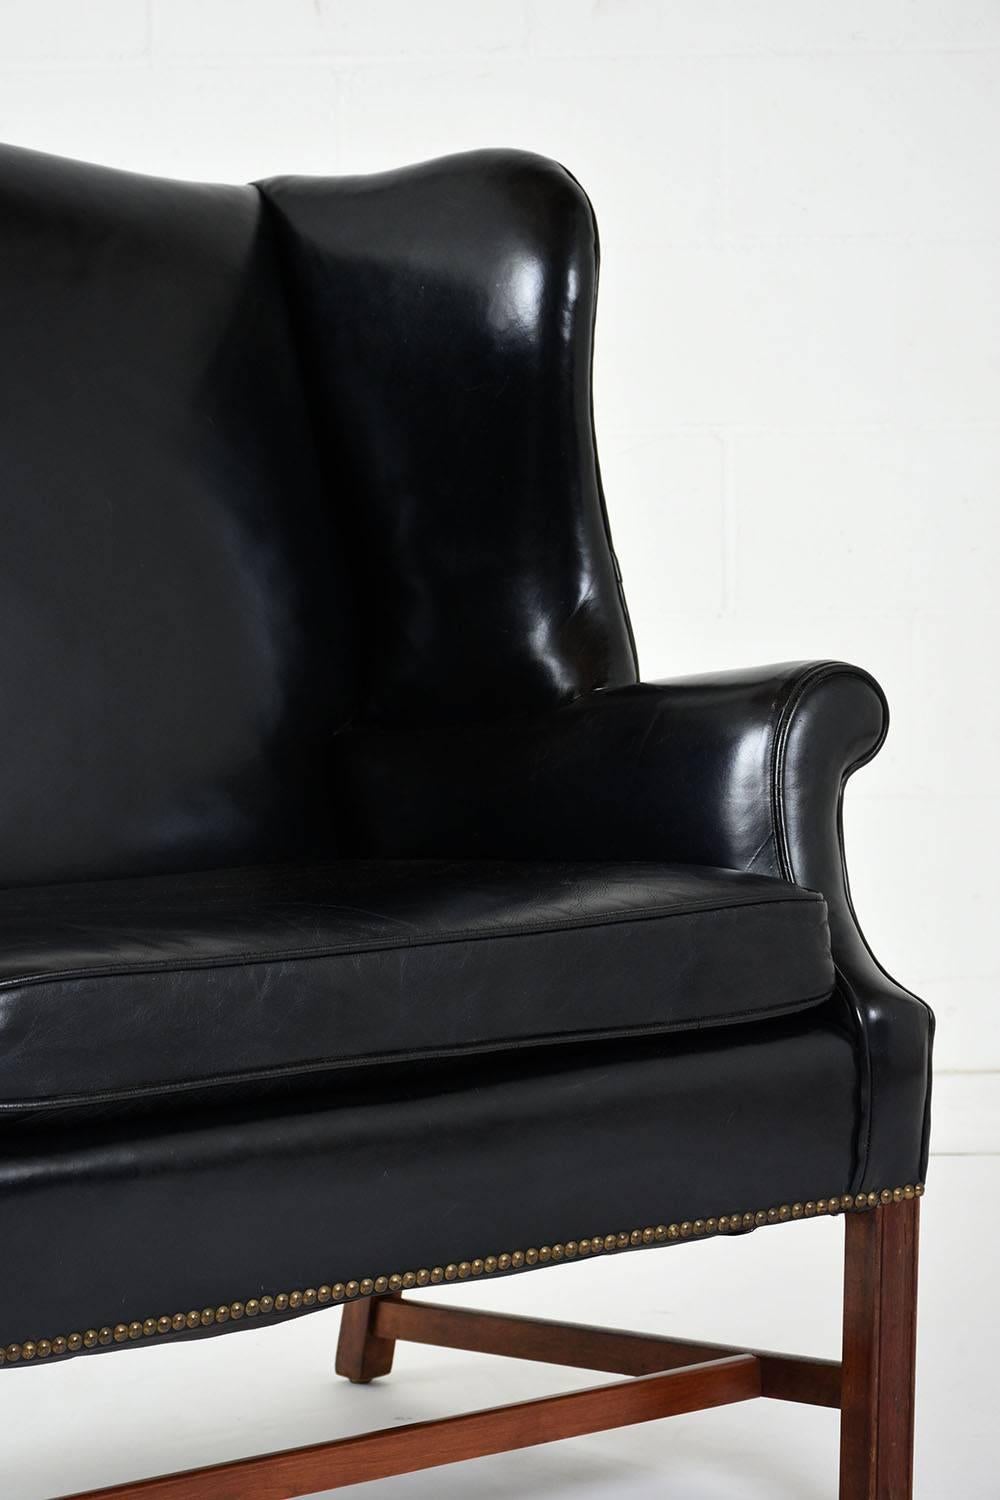 Wood Early 20th Century English Regency-style Wingback Leather Chair